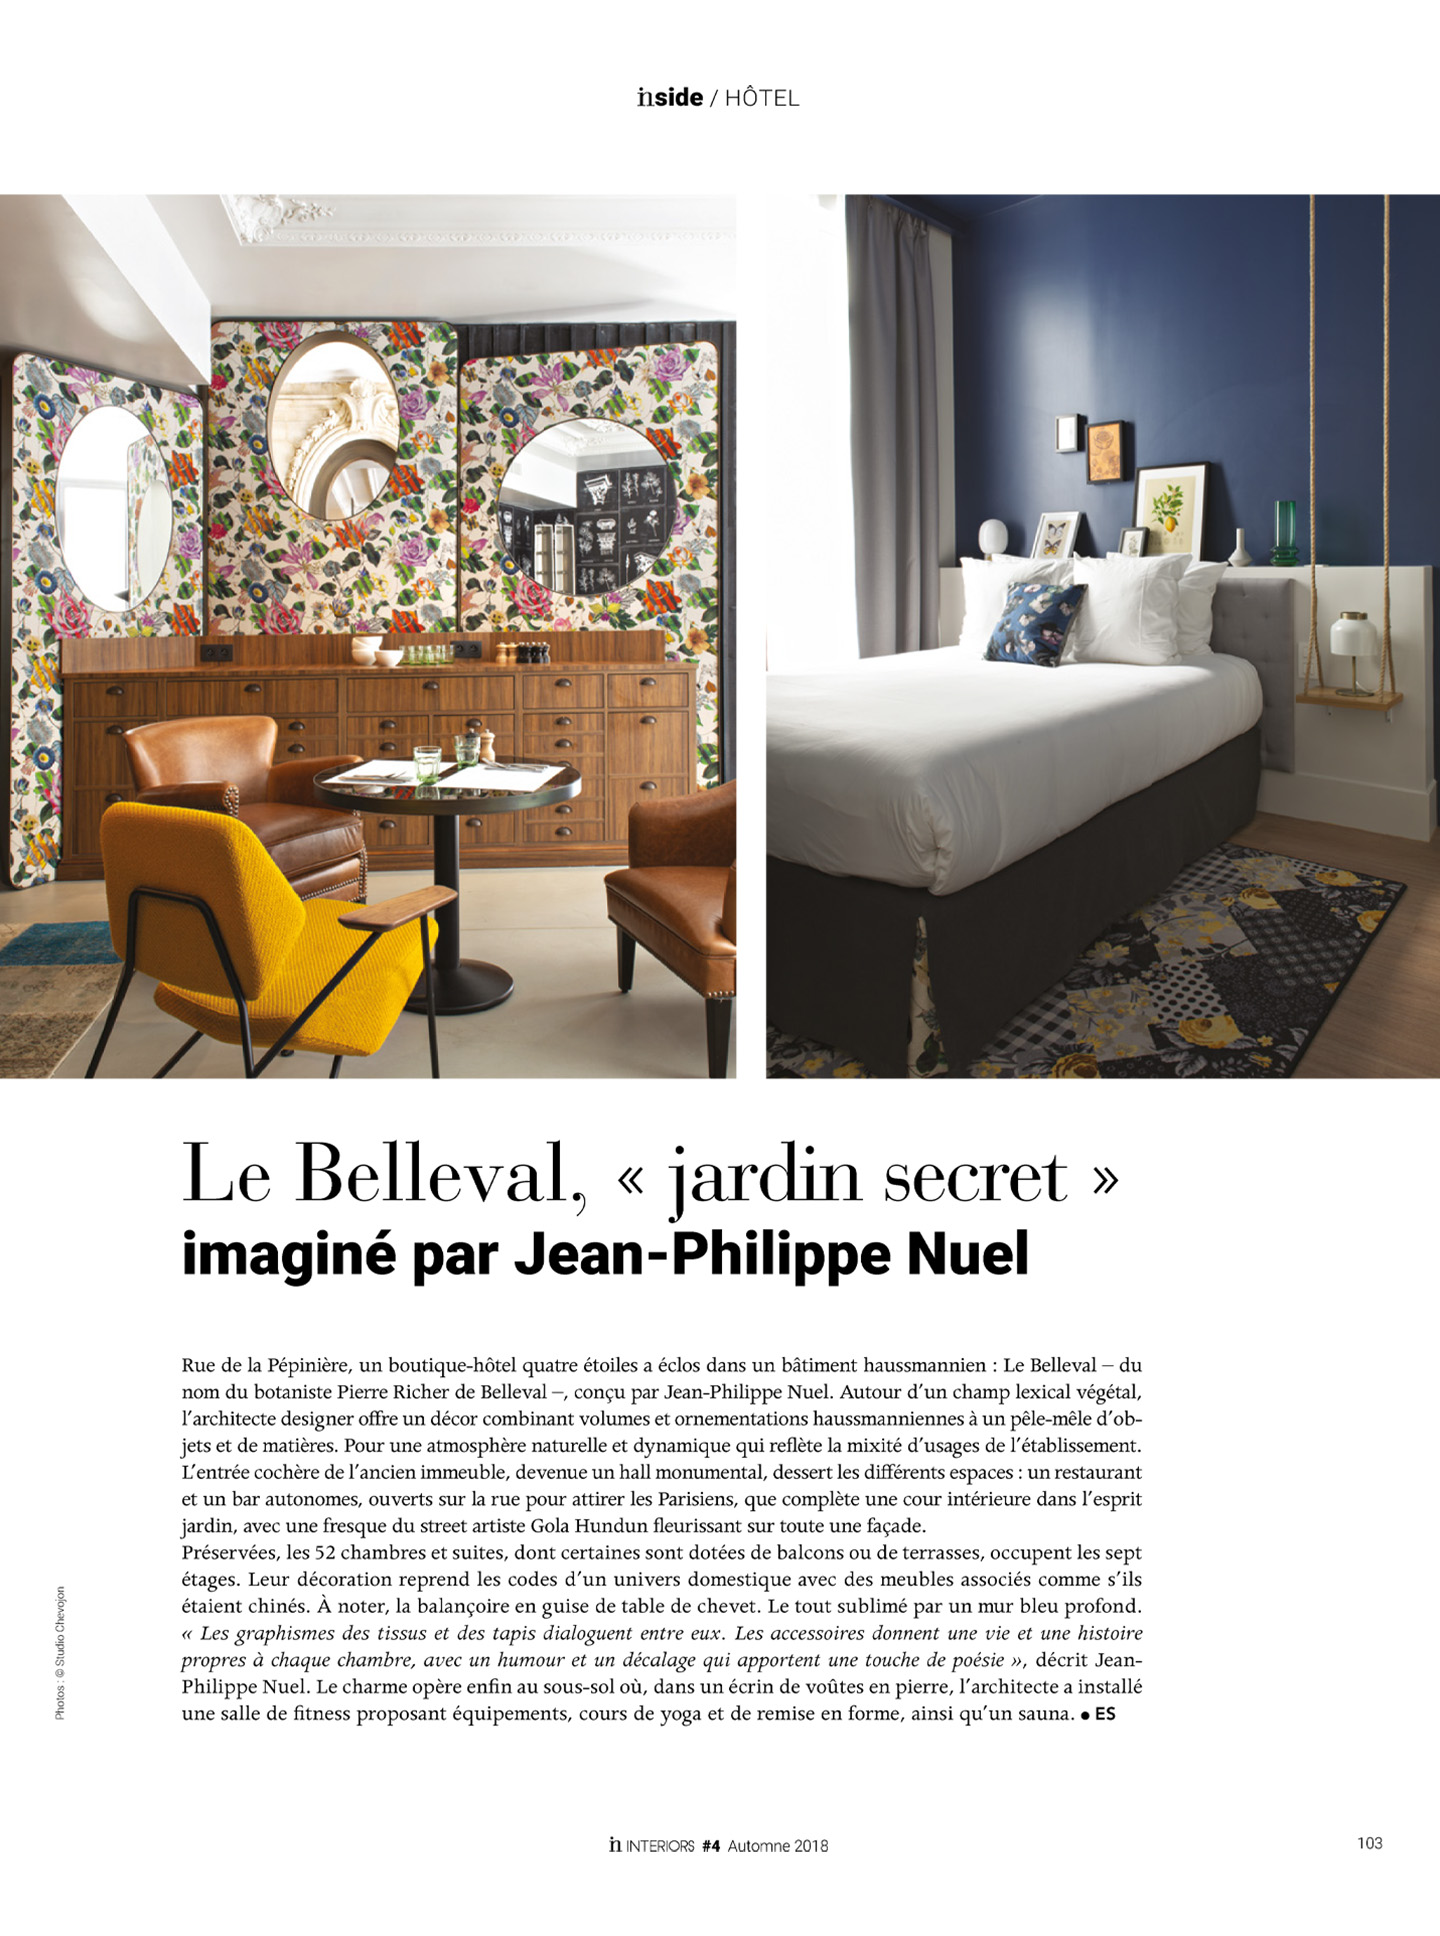 Article on the belleval by jean-Philippe Nuel studio in the magazine in interiors, new lifestyle hotel, luxury interior design, paris center, french luxury hotel